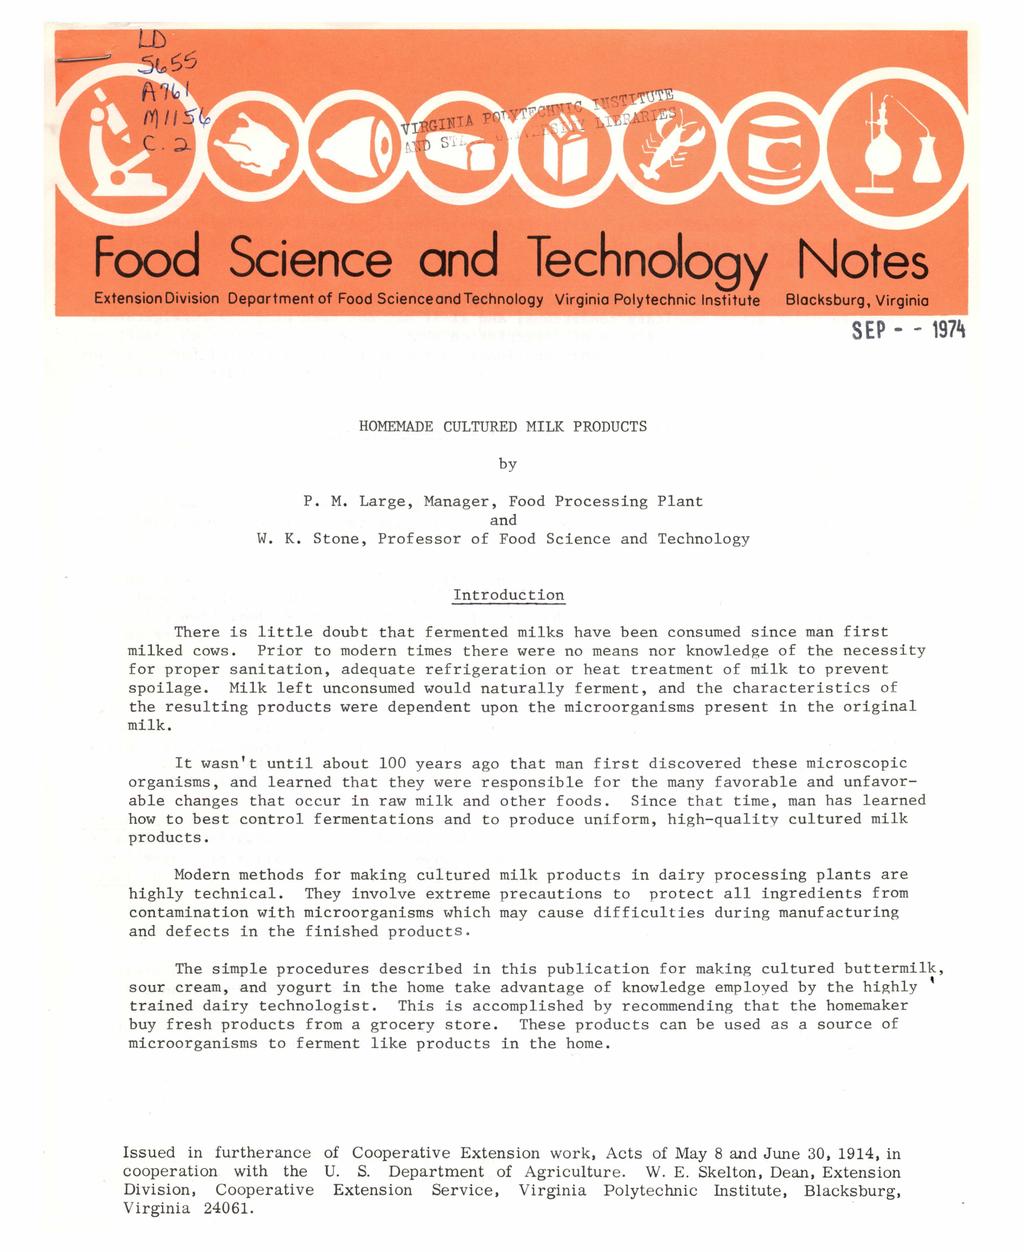 Food Science and Technology Notes Extension Division Deportment of Food ScienceandTechnology Virginia Polytechnic Institute Blacksburg, Virginia SEP - - 197~ HOMEMADE CULTURED MI